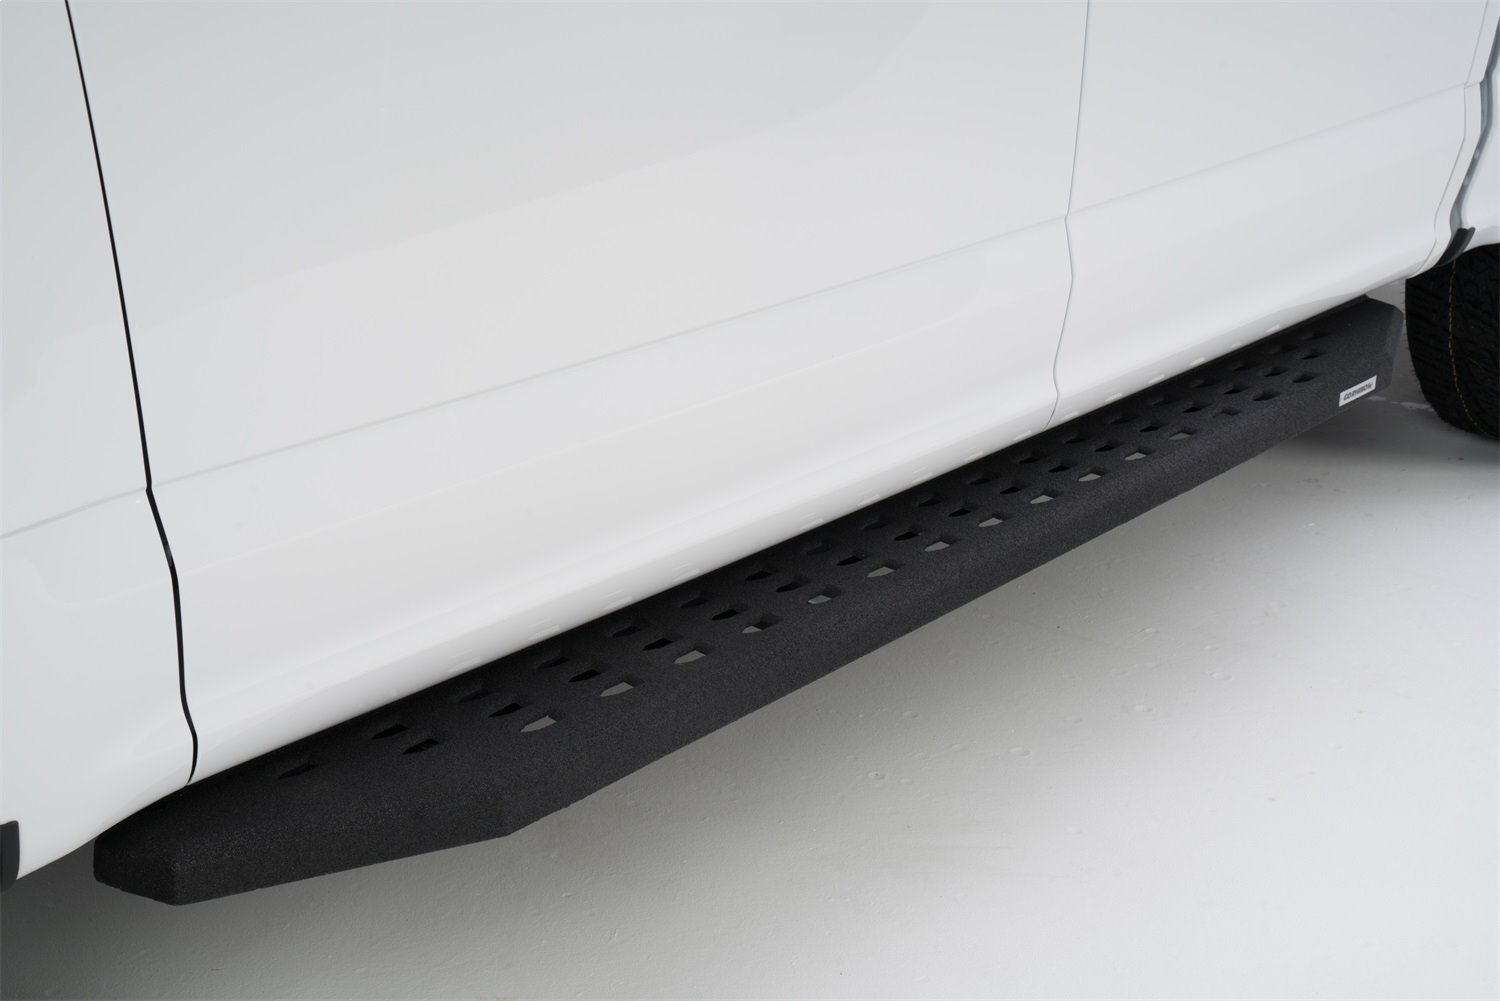 RB20 Running boards for 2004-2014 Ford F150 Super Cab